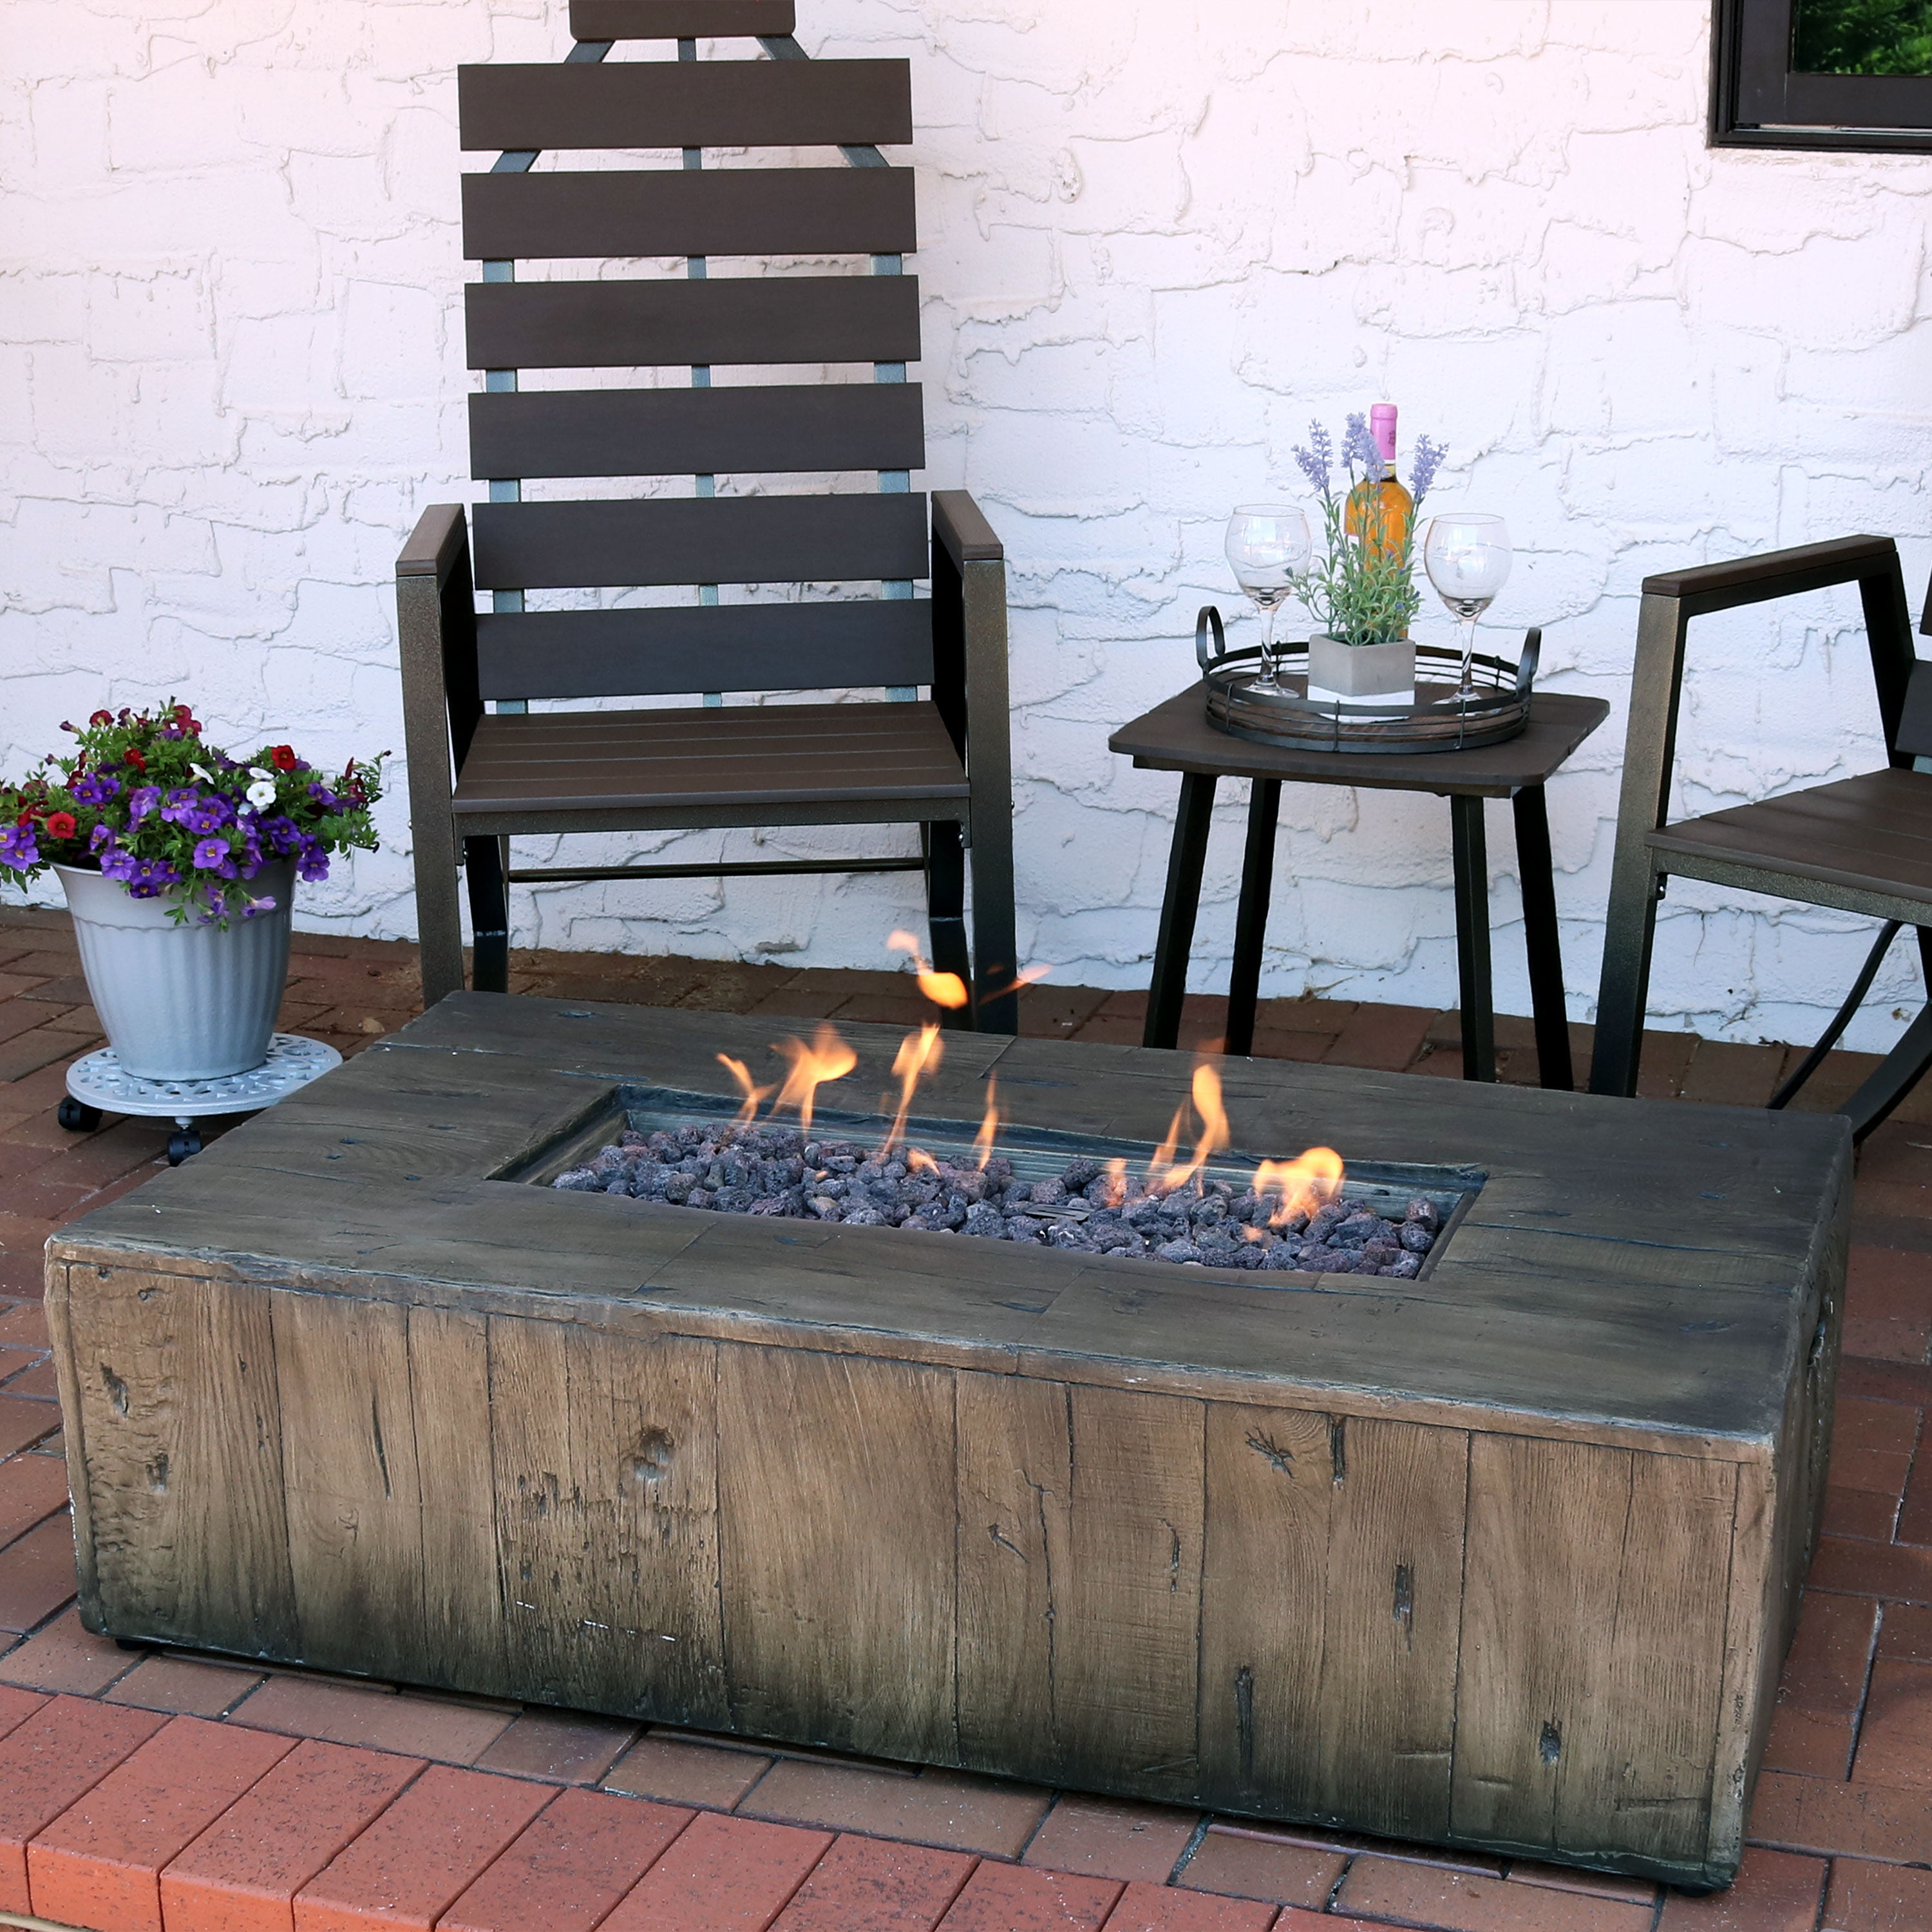 Sunnydaze Decor 48 Rustic Faux Wood Outdoor Propane Gas Fire Pit Table With Cover, Are Propane Fire Pits Safe On Covered Decks